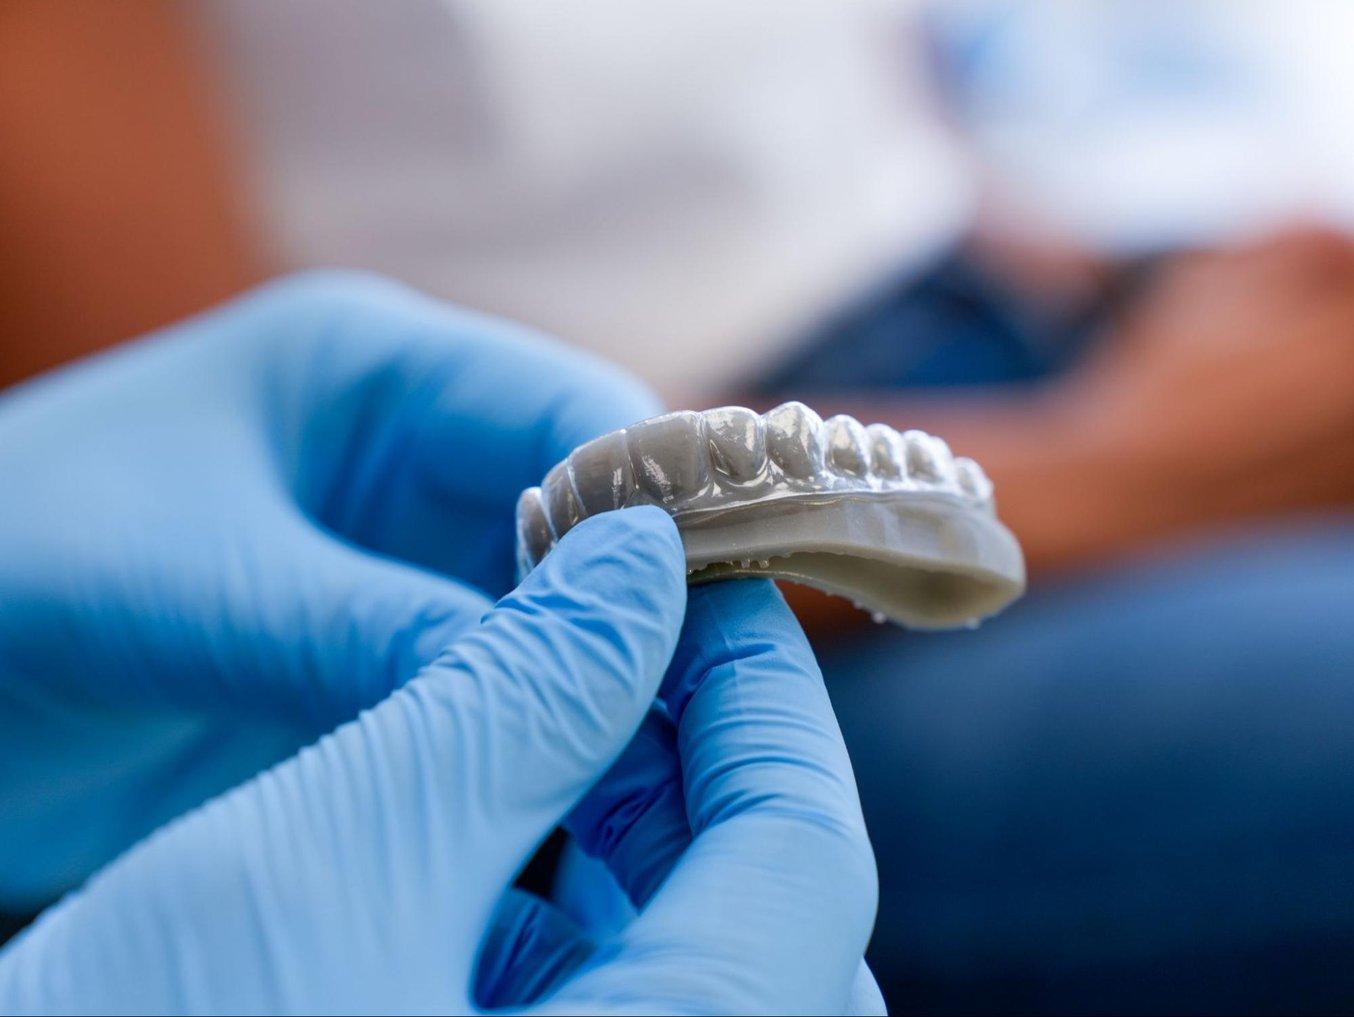 thermoformed aligner on a 3D printed model